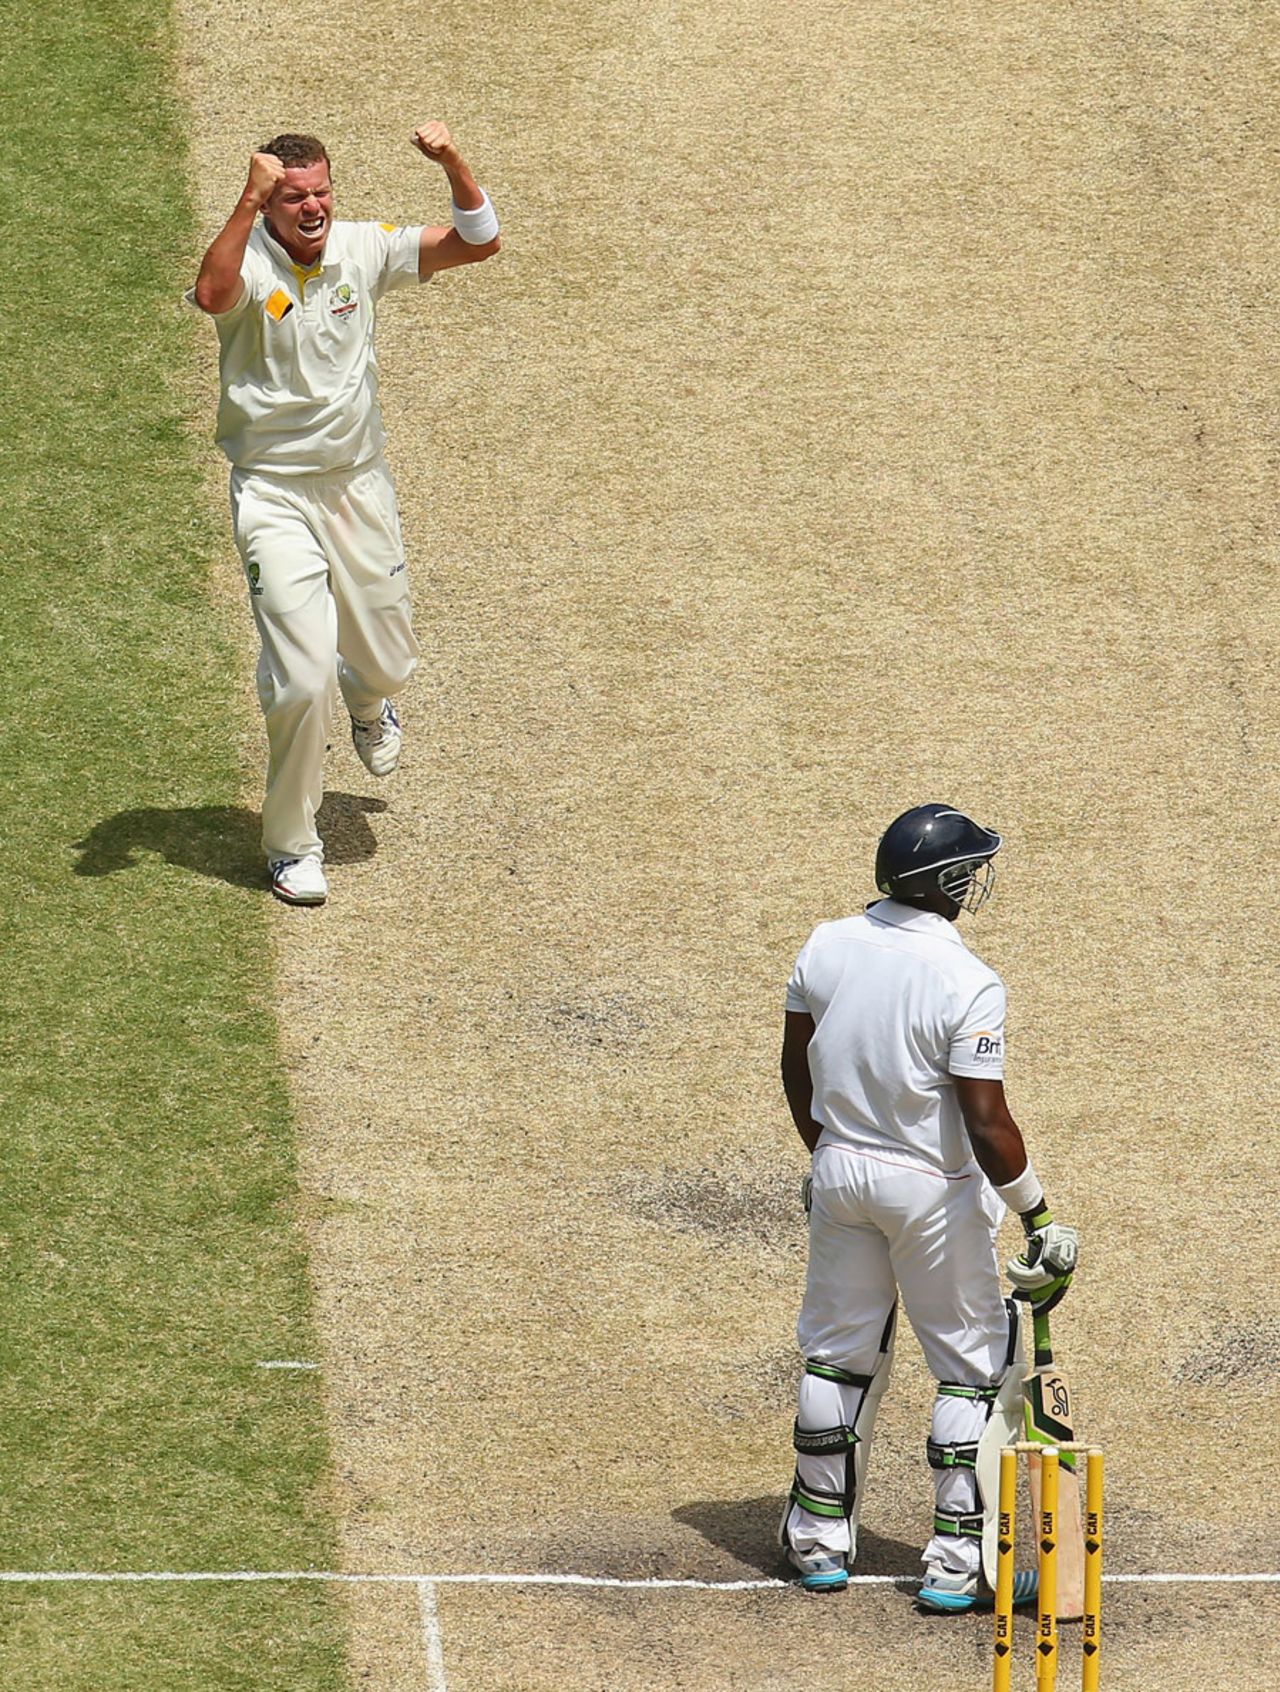 Peter Siddle celebrates after winning a decision against Michael Carberry, Australia v England, 4th Test, Melbourne, 3rd day, December 28, 2013